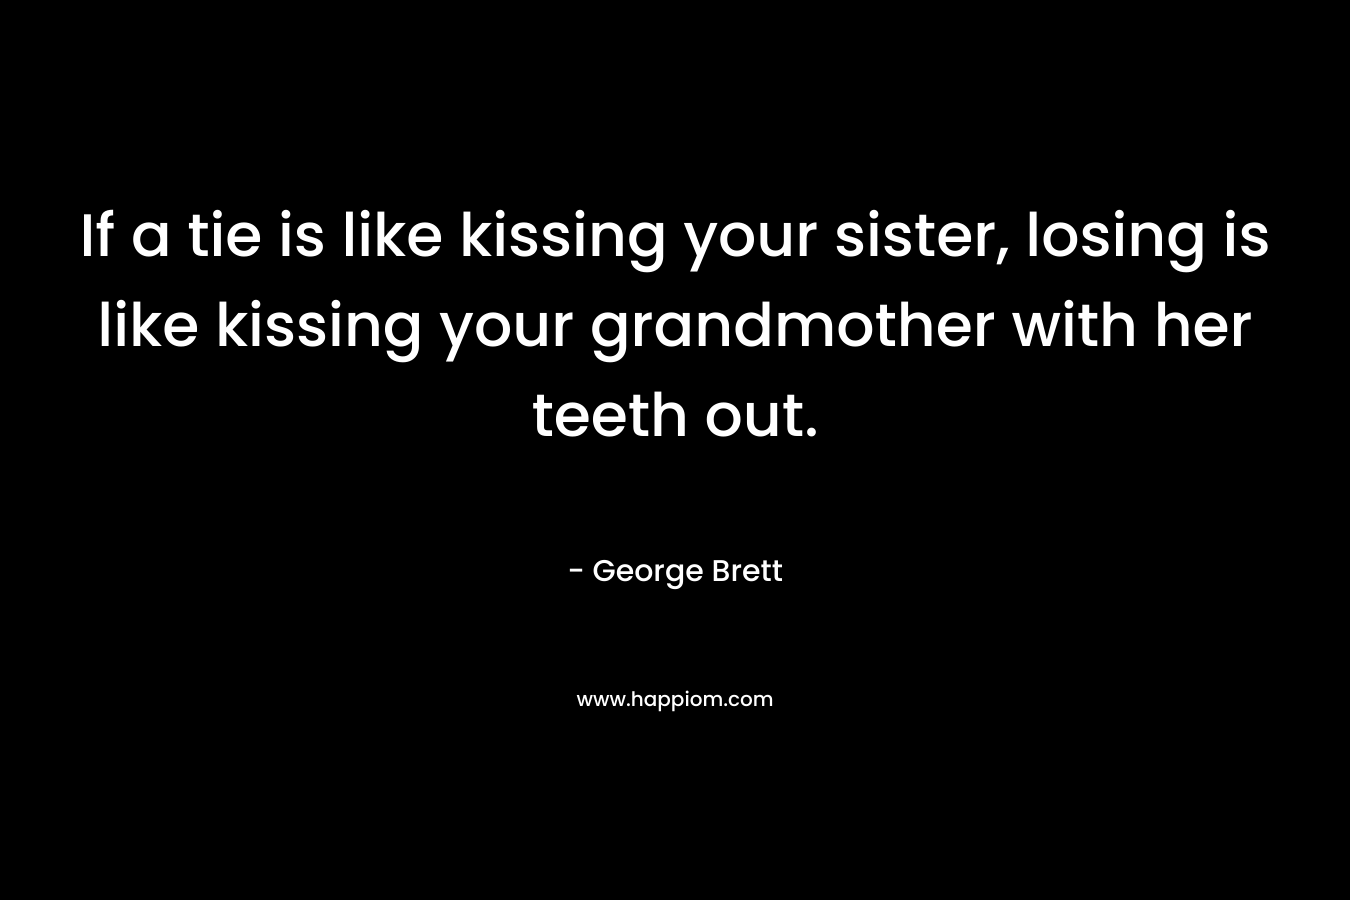 If a tie is like kissing your sister, losing is like kissing your grandmother with her teeth out.